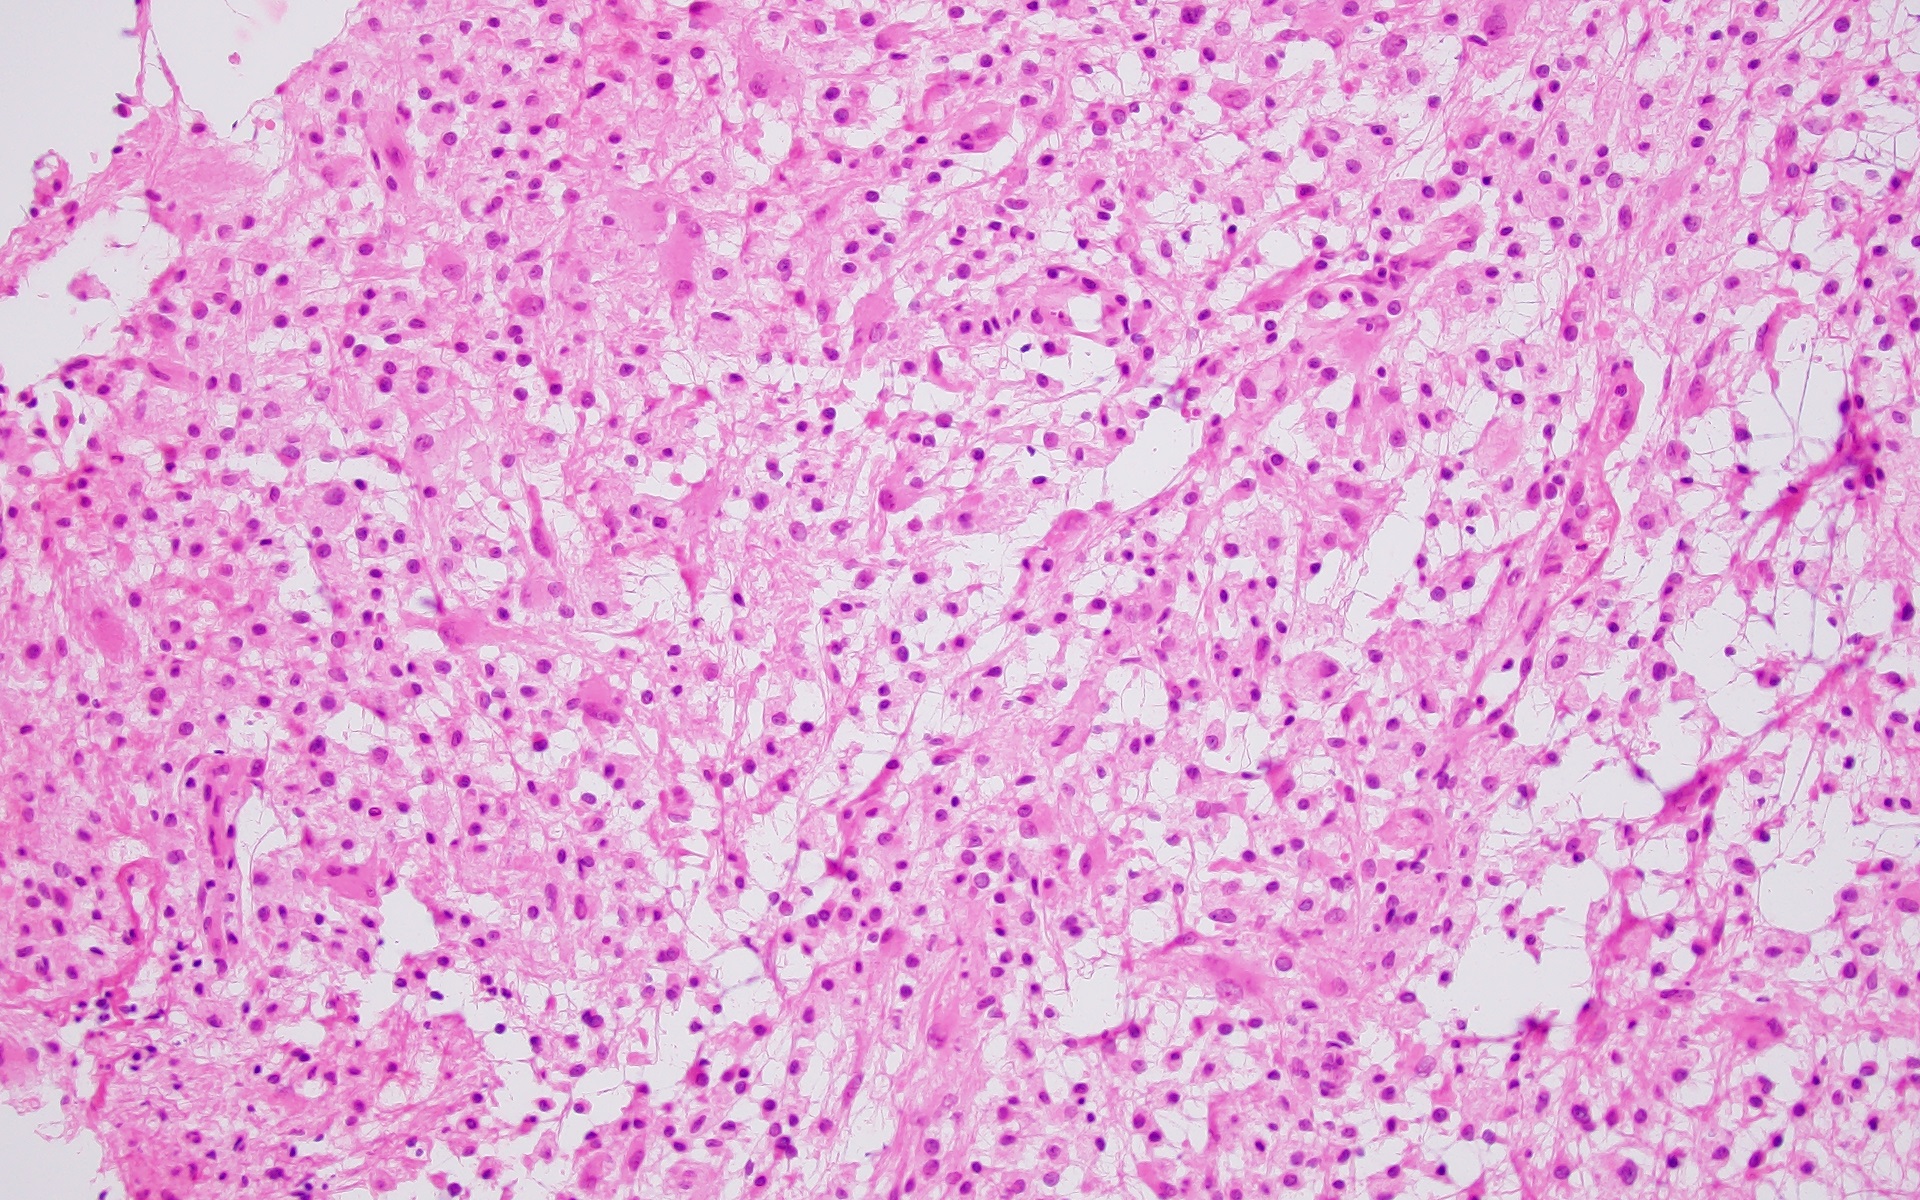 Frozen section of demyelination lesion